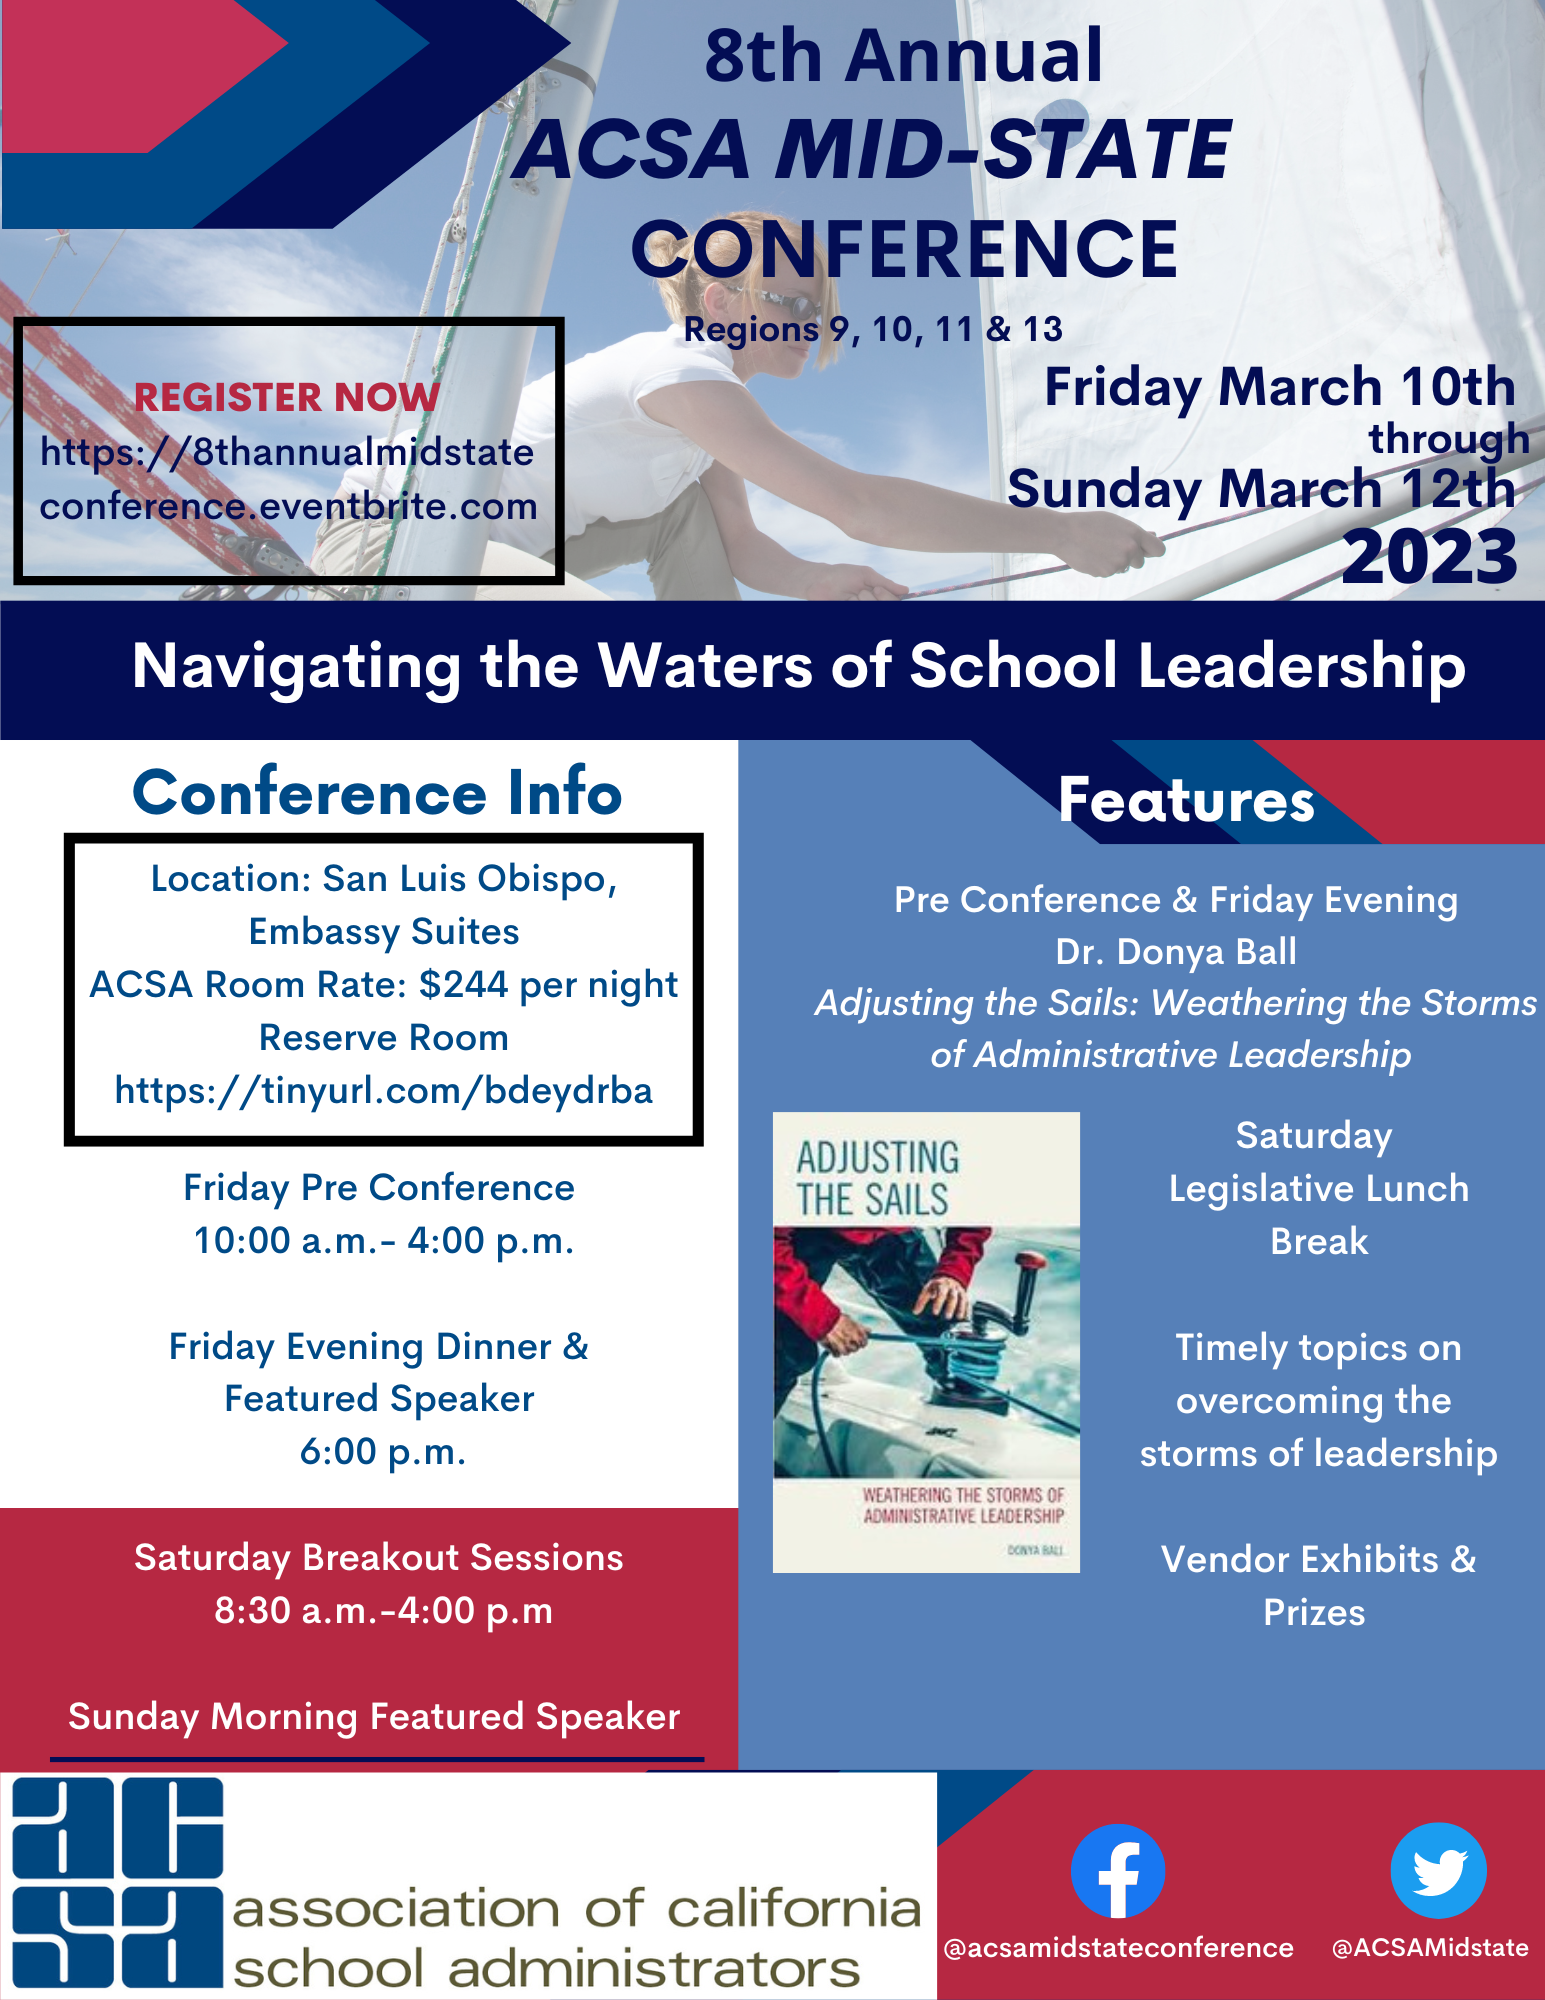 ACSA Mid-State Conference